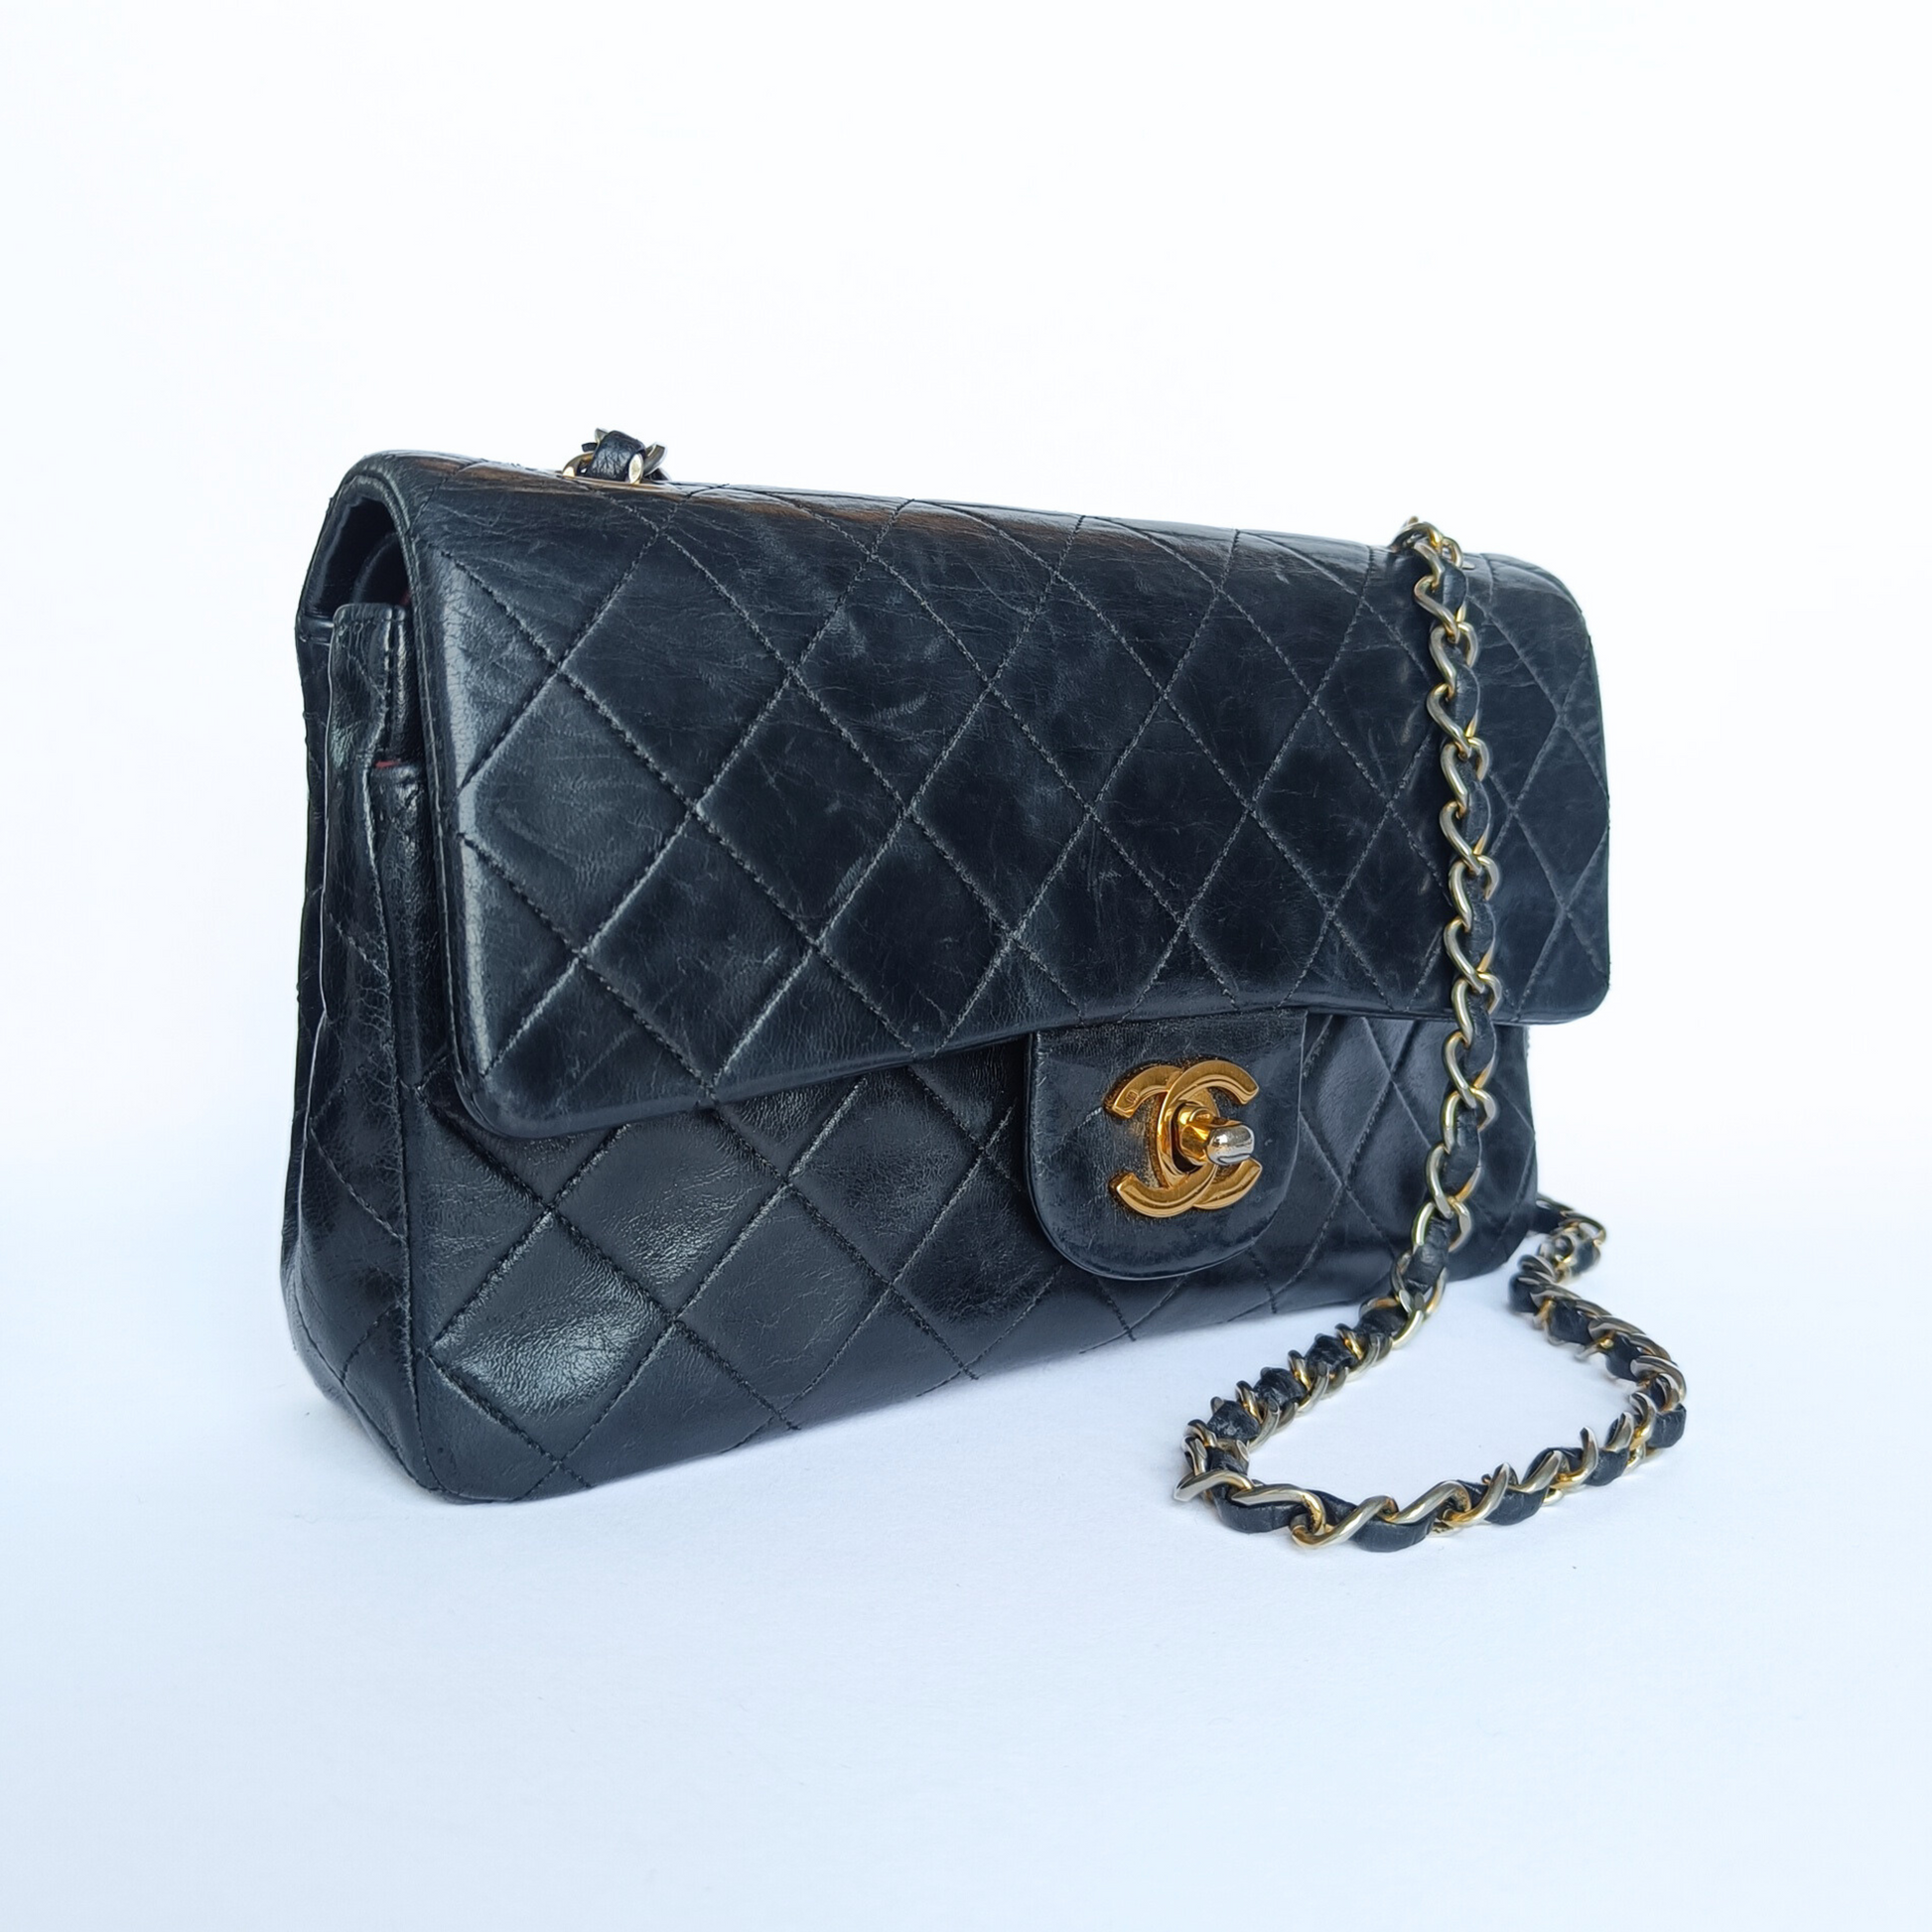 Chanel Chanel Classic Double Flap Bag Small Lambskin Leather - Shoulder bag - Etoile Luxury Vintage